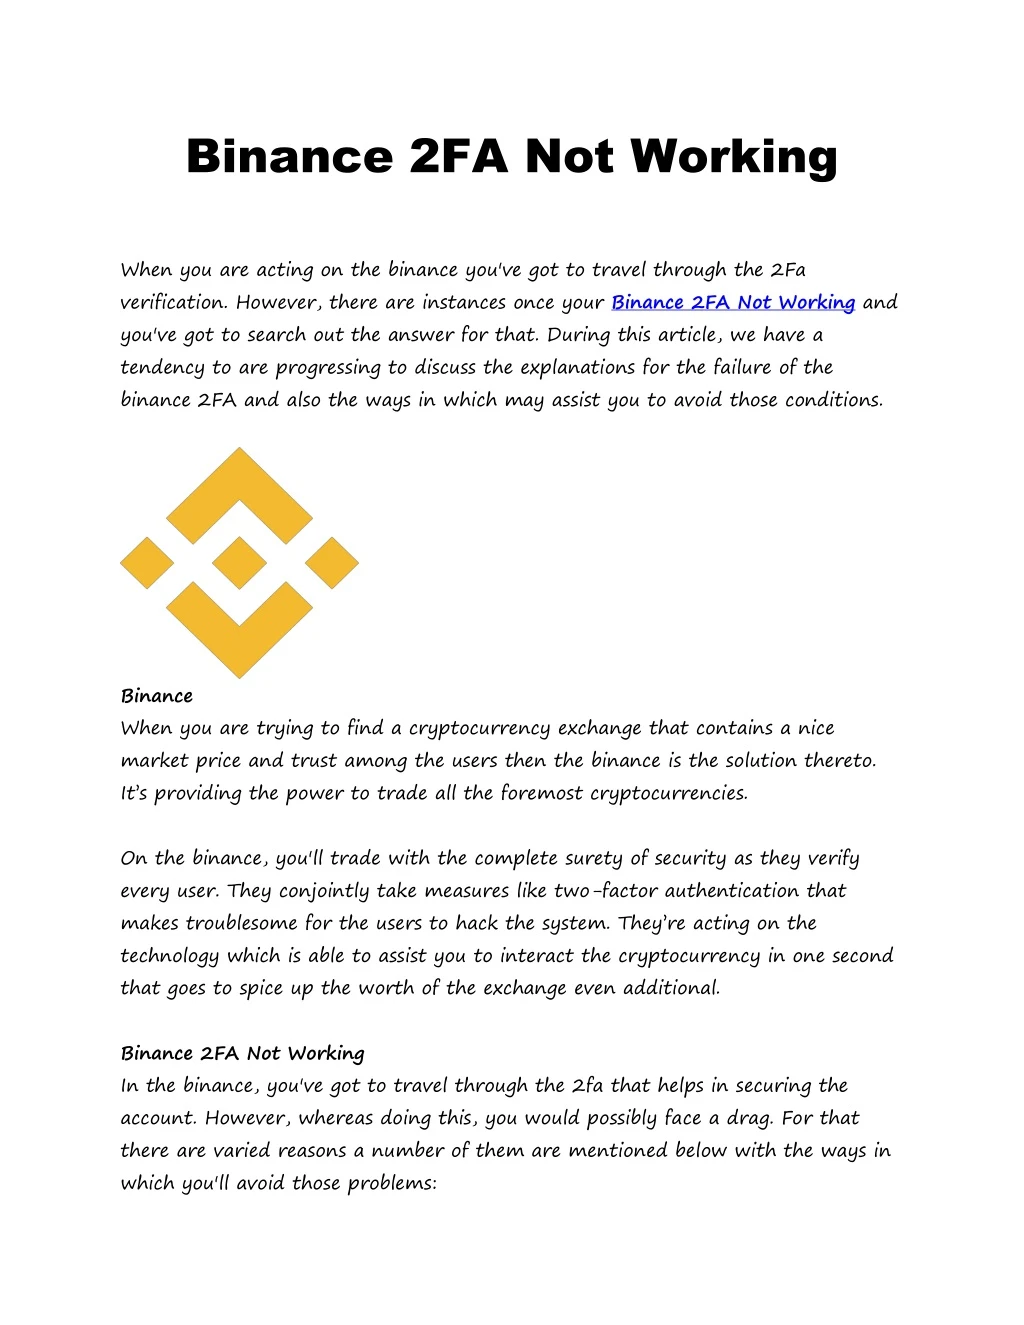 binance 2fa not working when you are acting